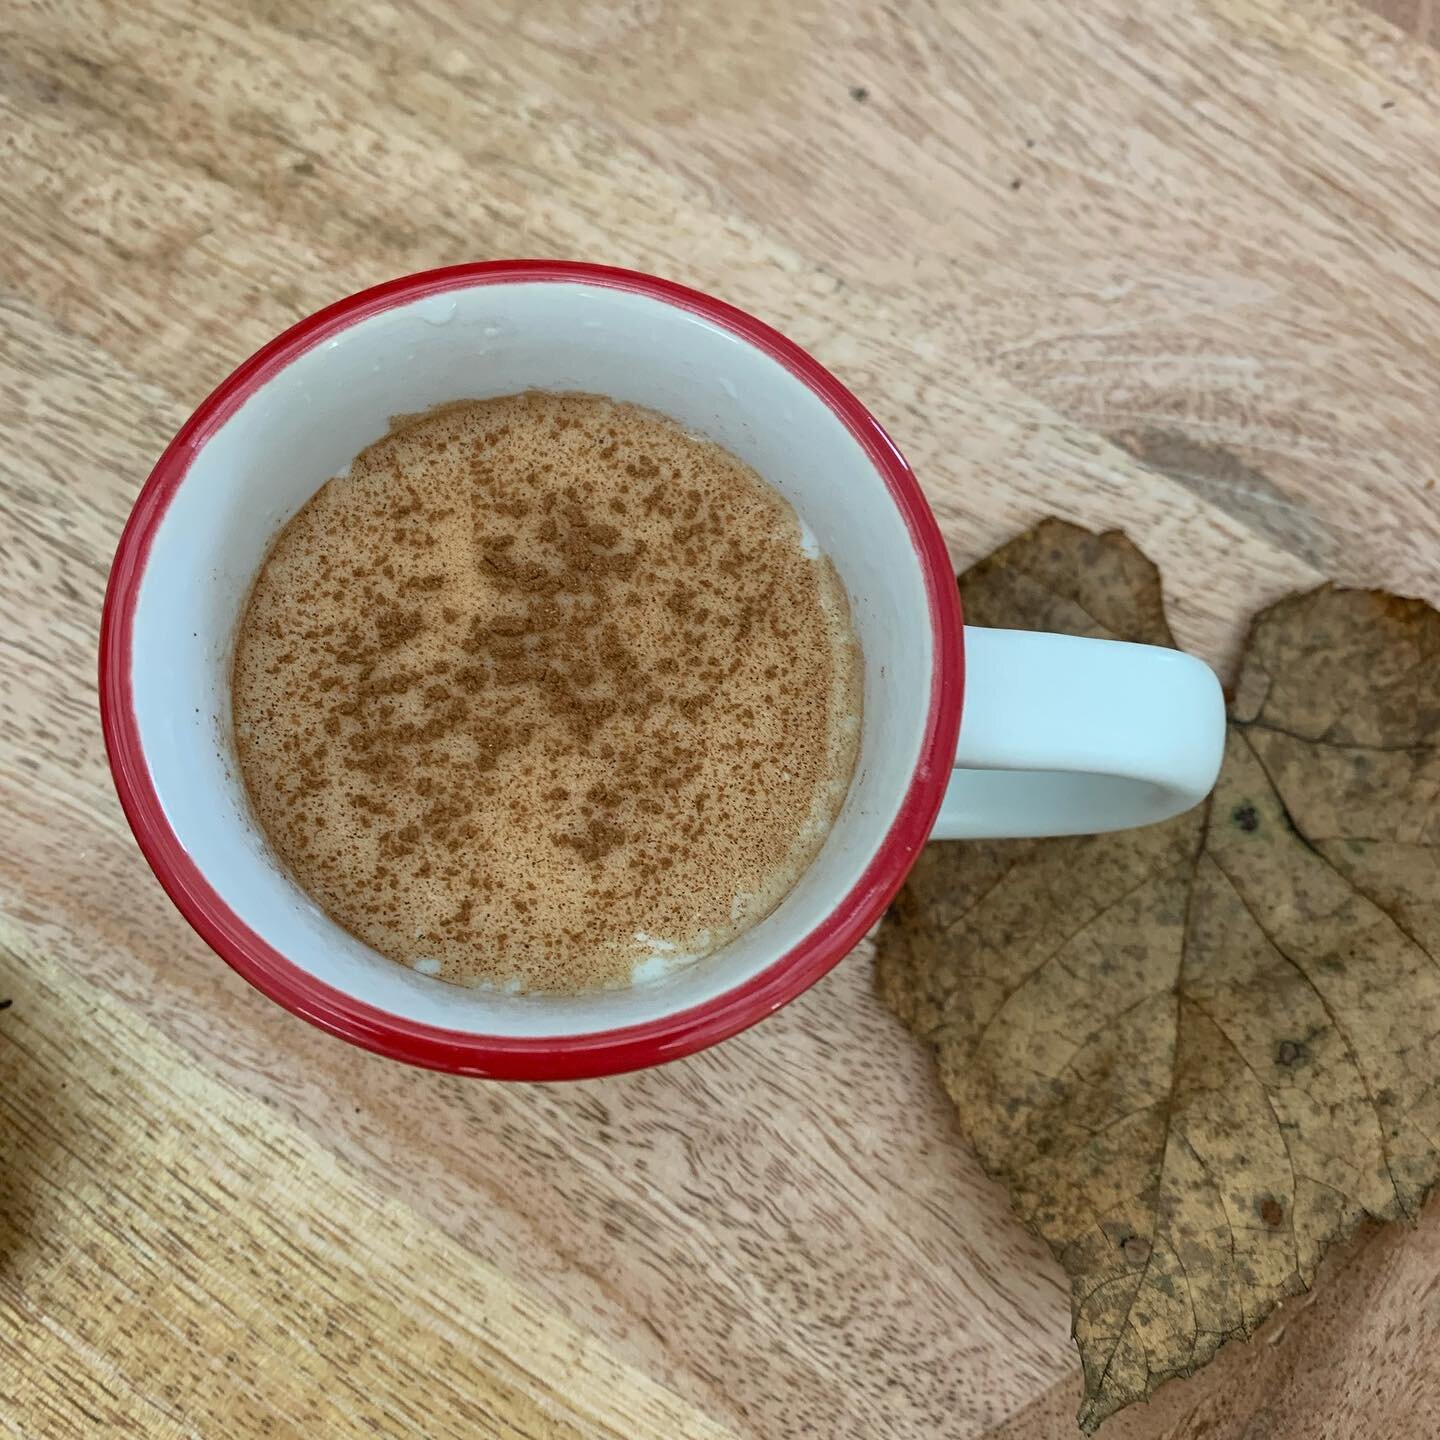 Fall is my favorite season. I feel life all around starts to calm down. Early, chilly mornings are my favorite time to stop and appreciate the beauty the outside world is showing us. Warm milk with maple syrup and cinnamon is my family&rsquo;s favori